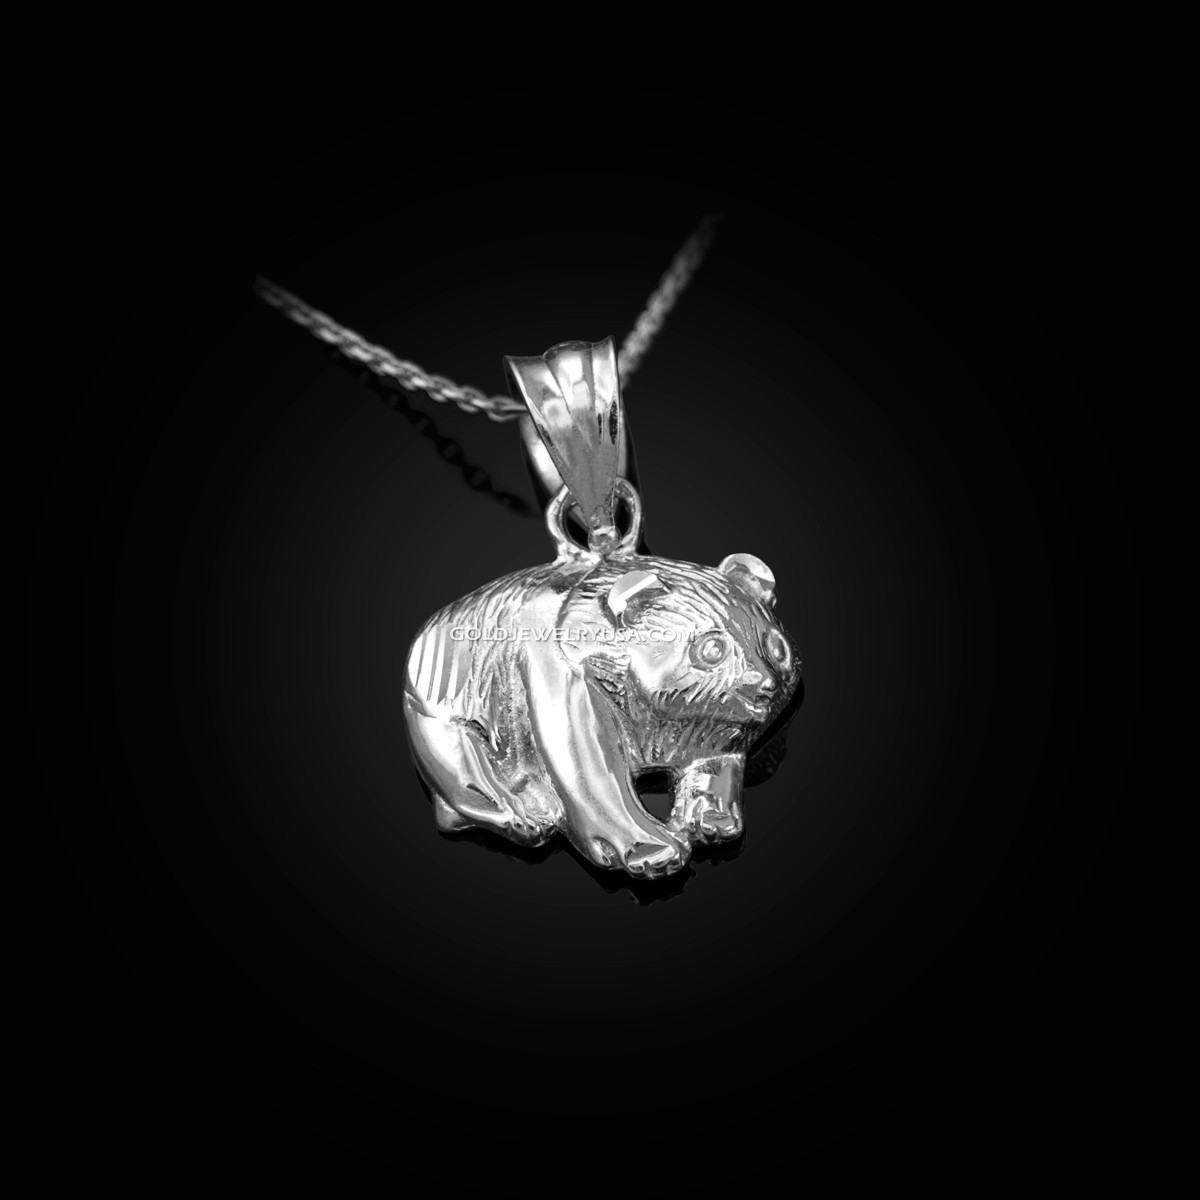 White Gold Grizzly Bear Charm Necklace